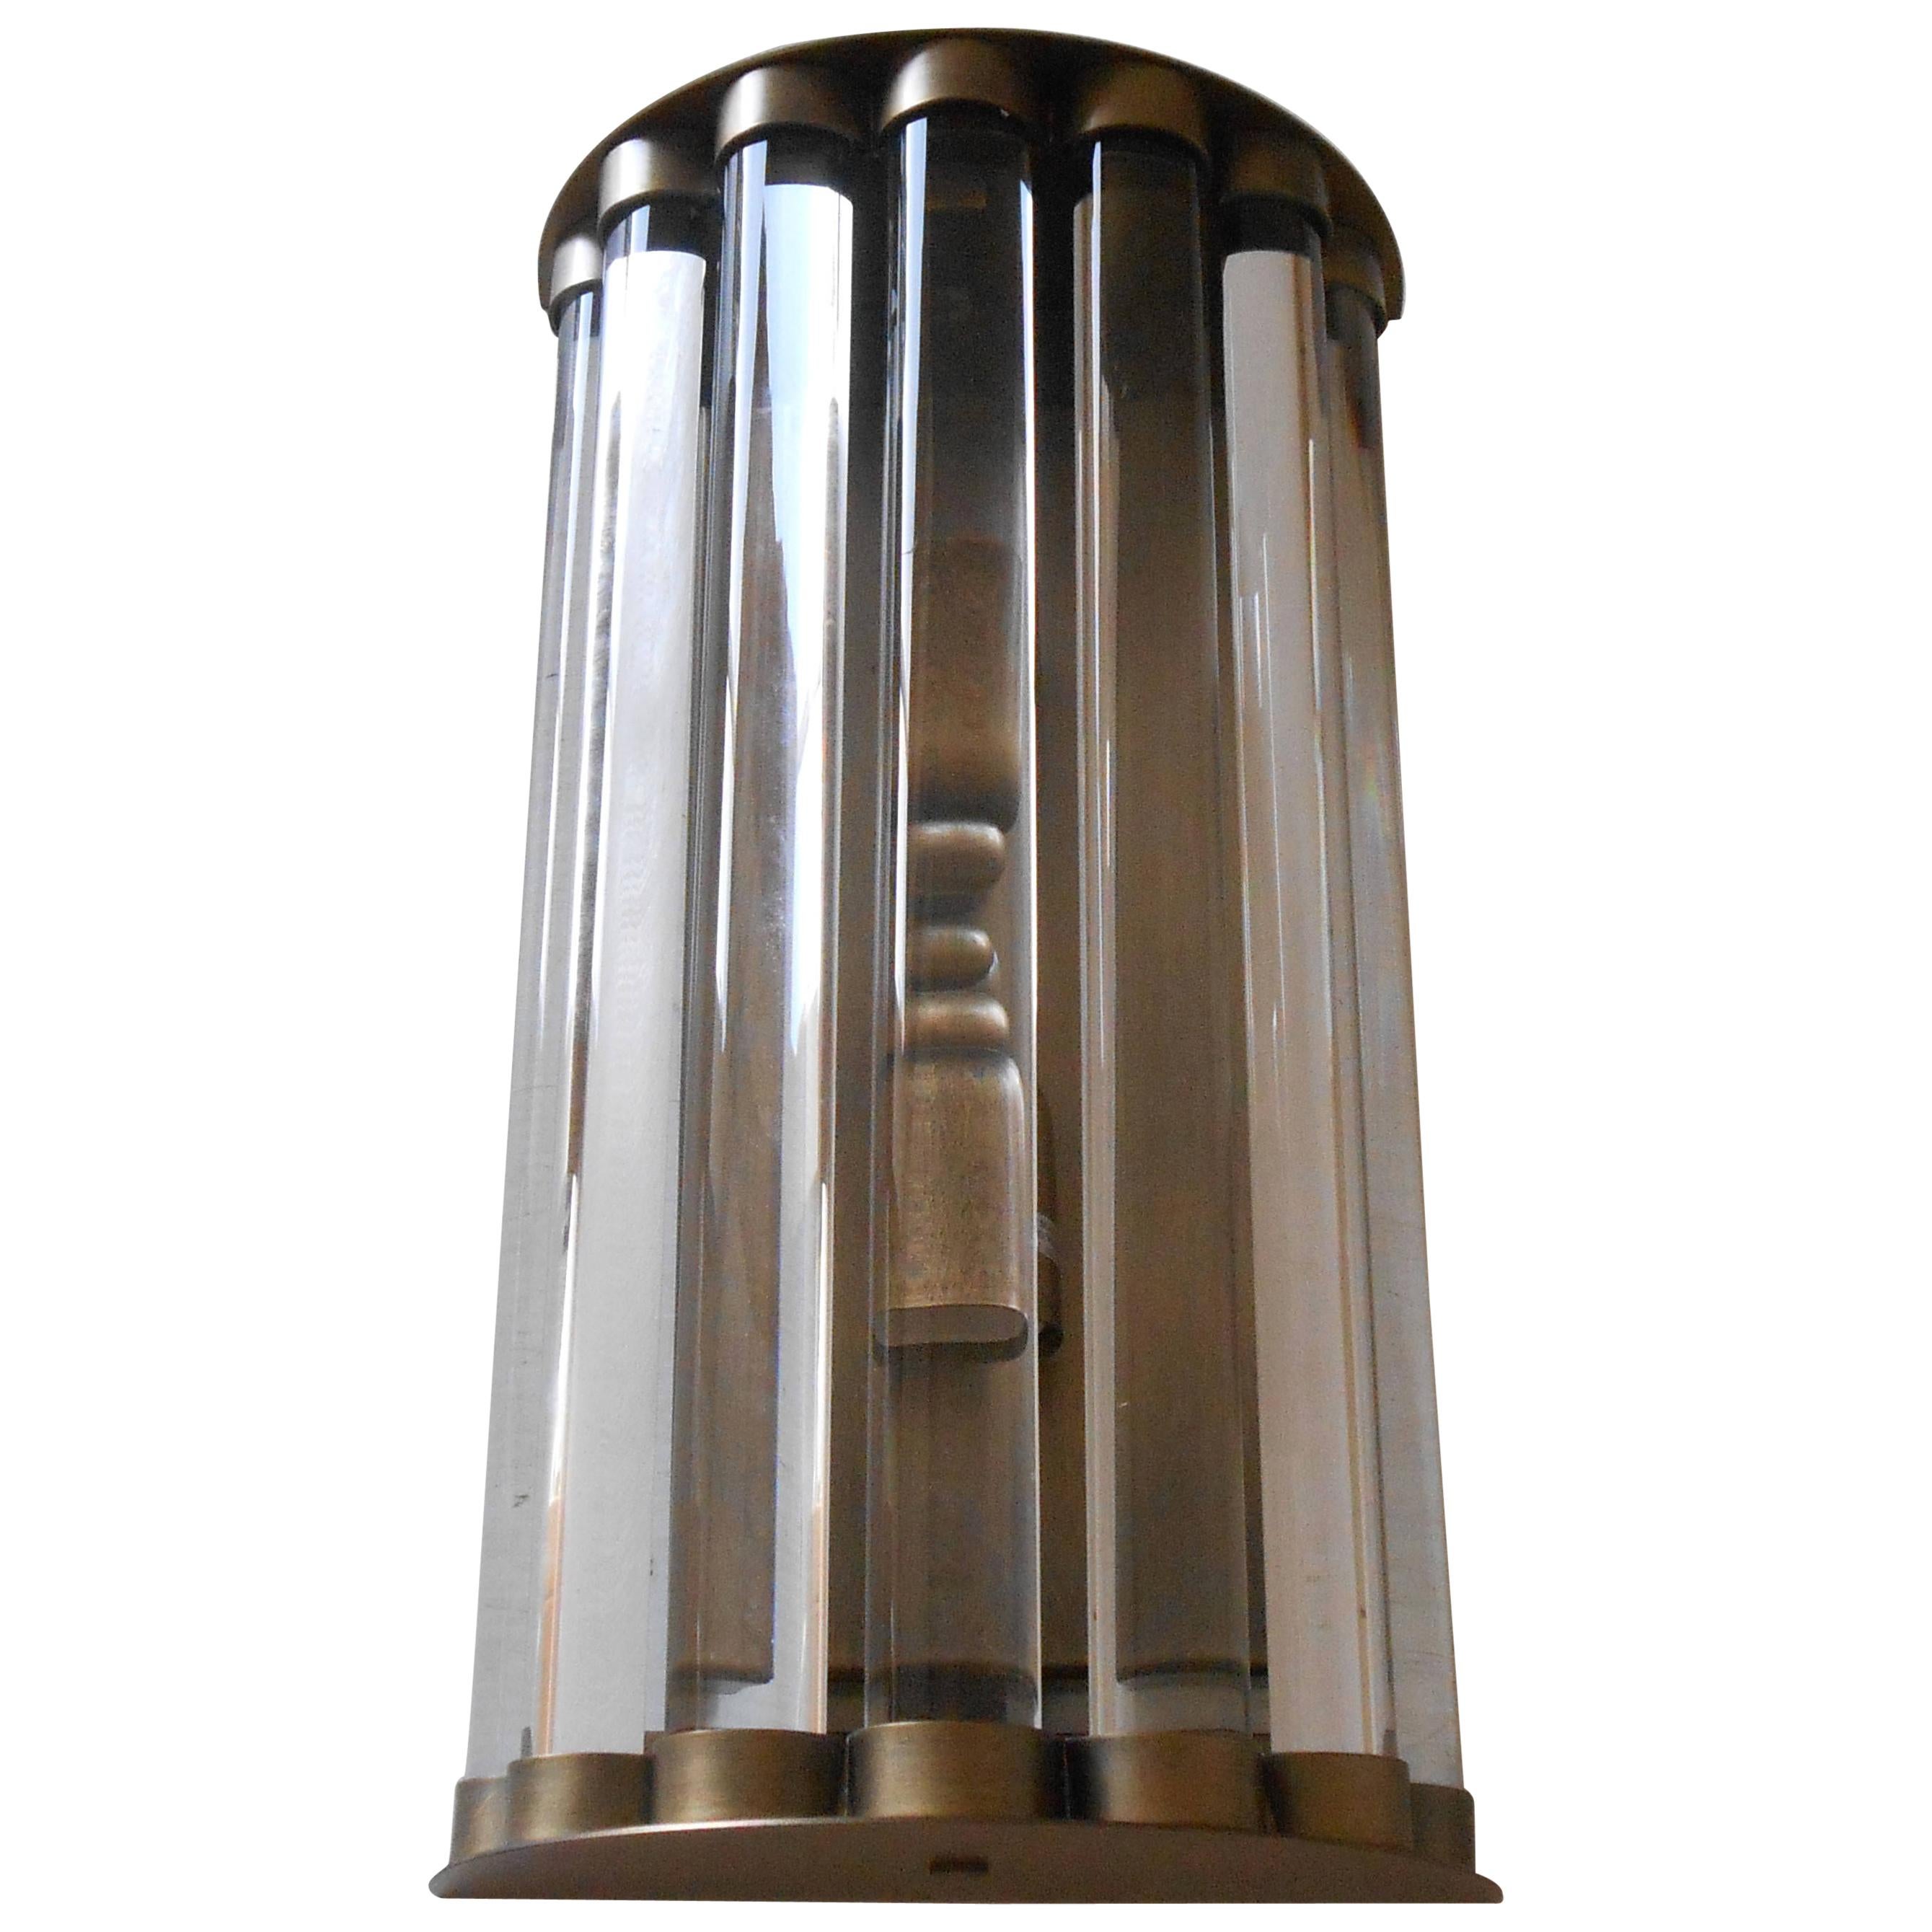 Italian wall light or flush mount with crystal bars mounted on bronzed metal finish / Designed by Fabio Bergomi for Fabio Ltd / Made in Italy
2 lights / E12 or E14 type / max 40W each
Height: 14 inches / Width: 8 inches / Depth: 4 inches 
Order Only